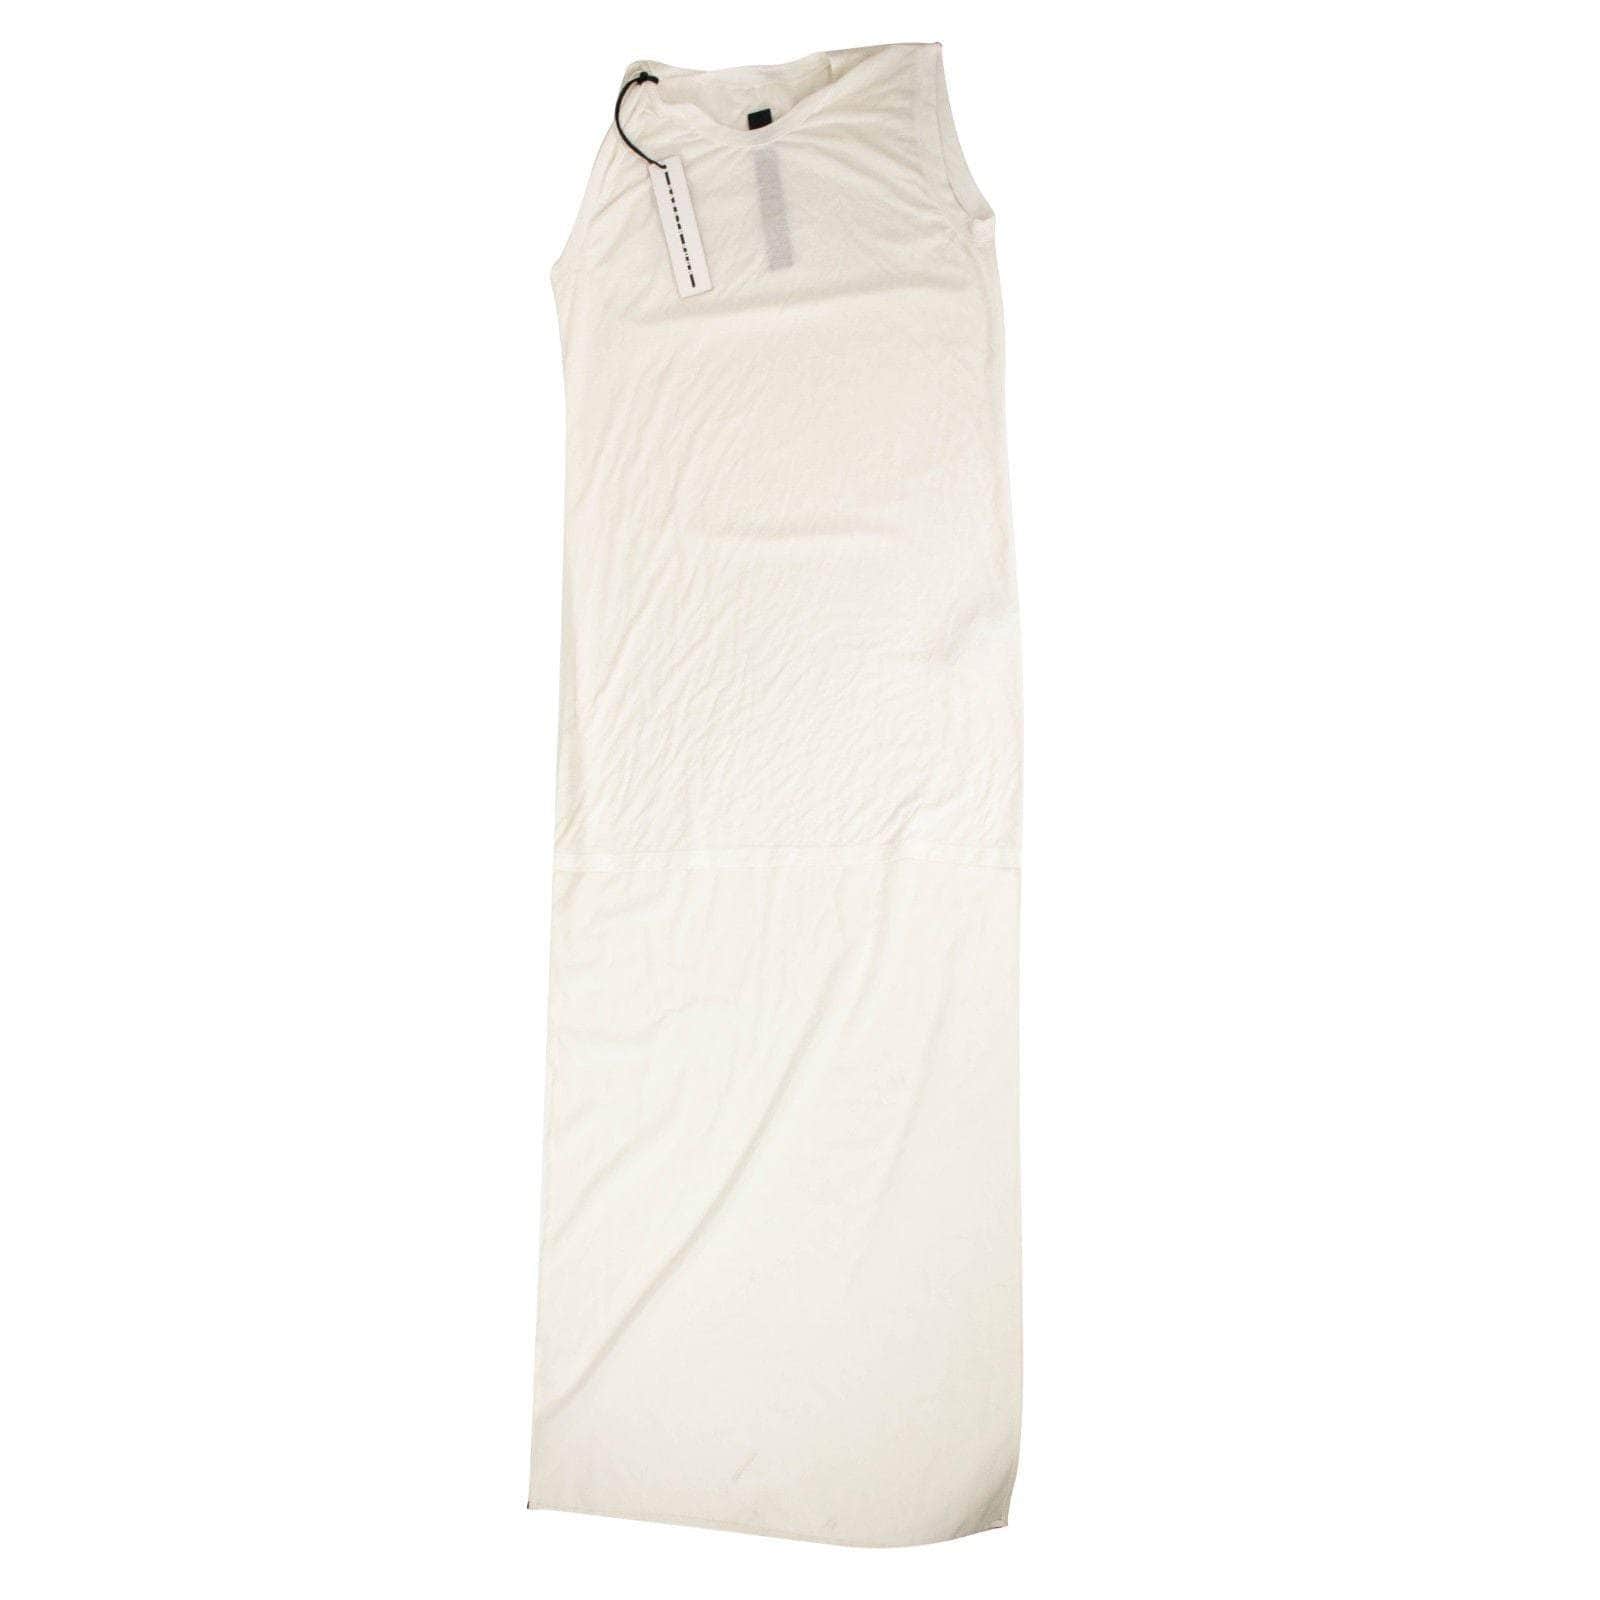 Gareth Pugh chicmi, couponcollection, gender-womens, main-clothing, size-6, under-250, womens-tank-tops 6 Woven 'Natural' Sleeveless Asymmetrical Long Top 58LE-1388/6 58LE-1388/6